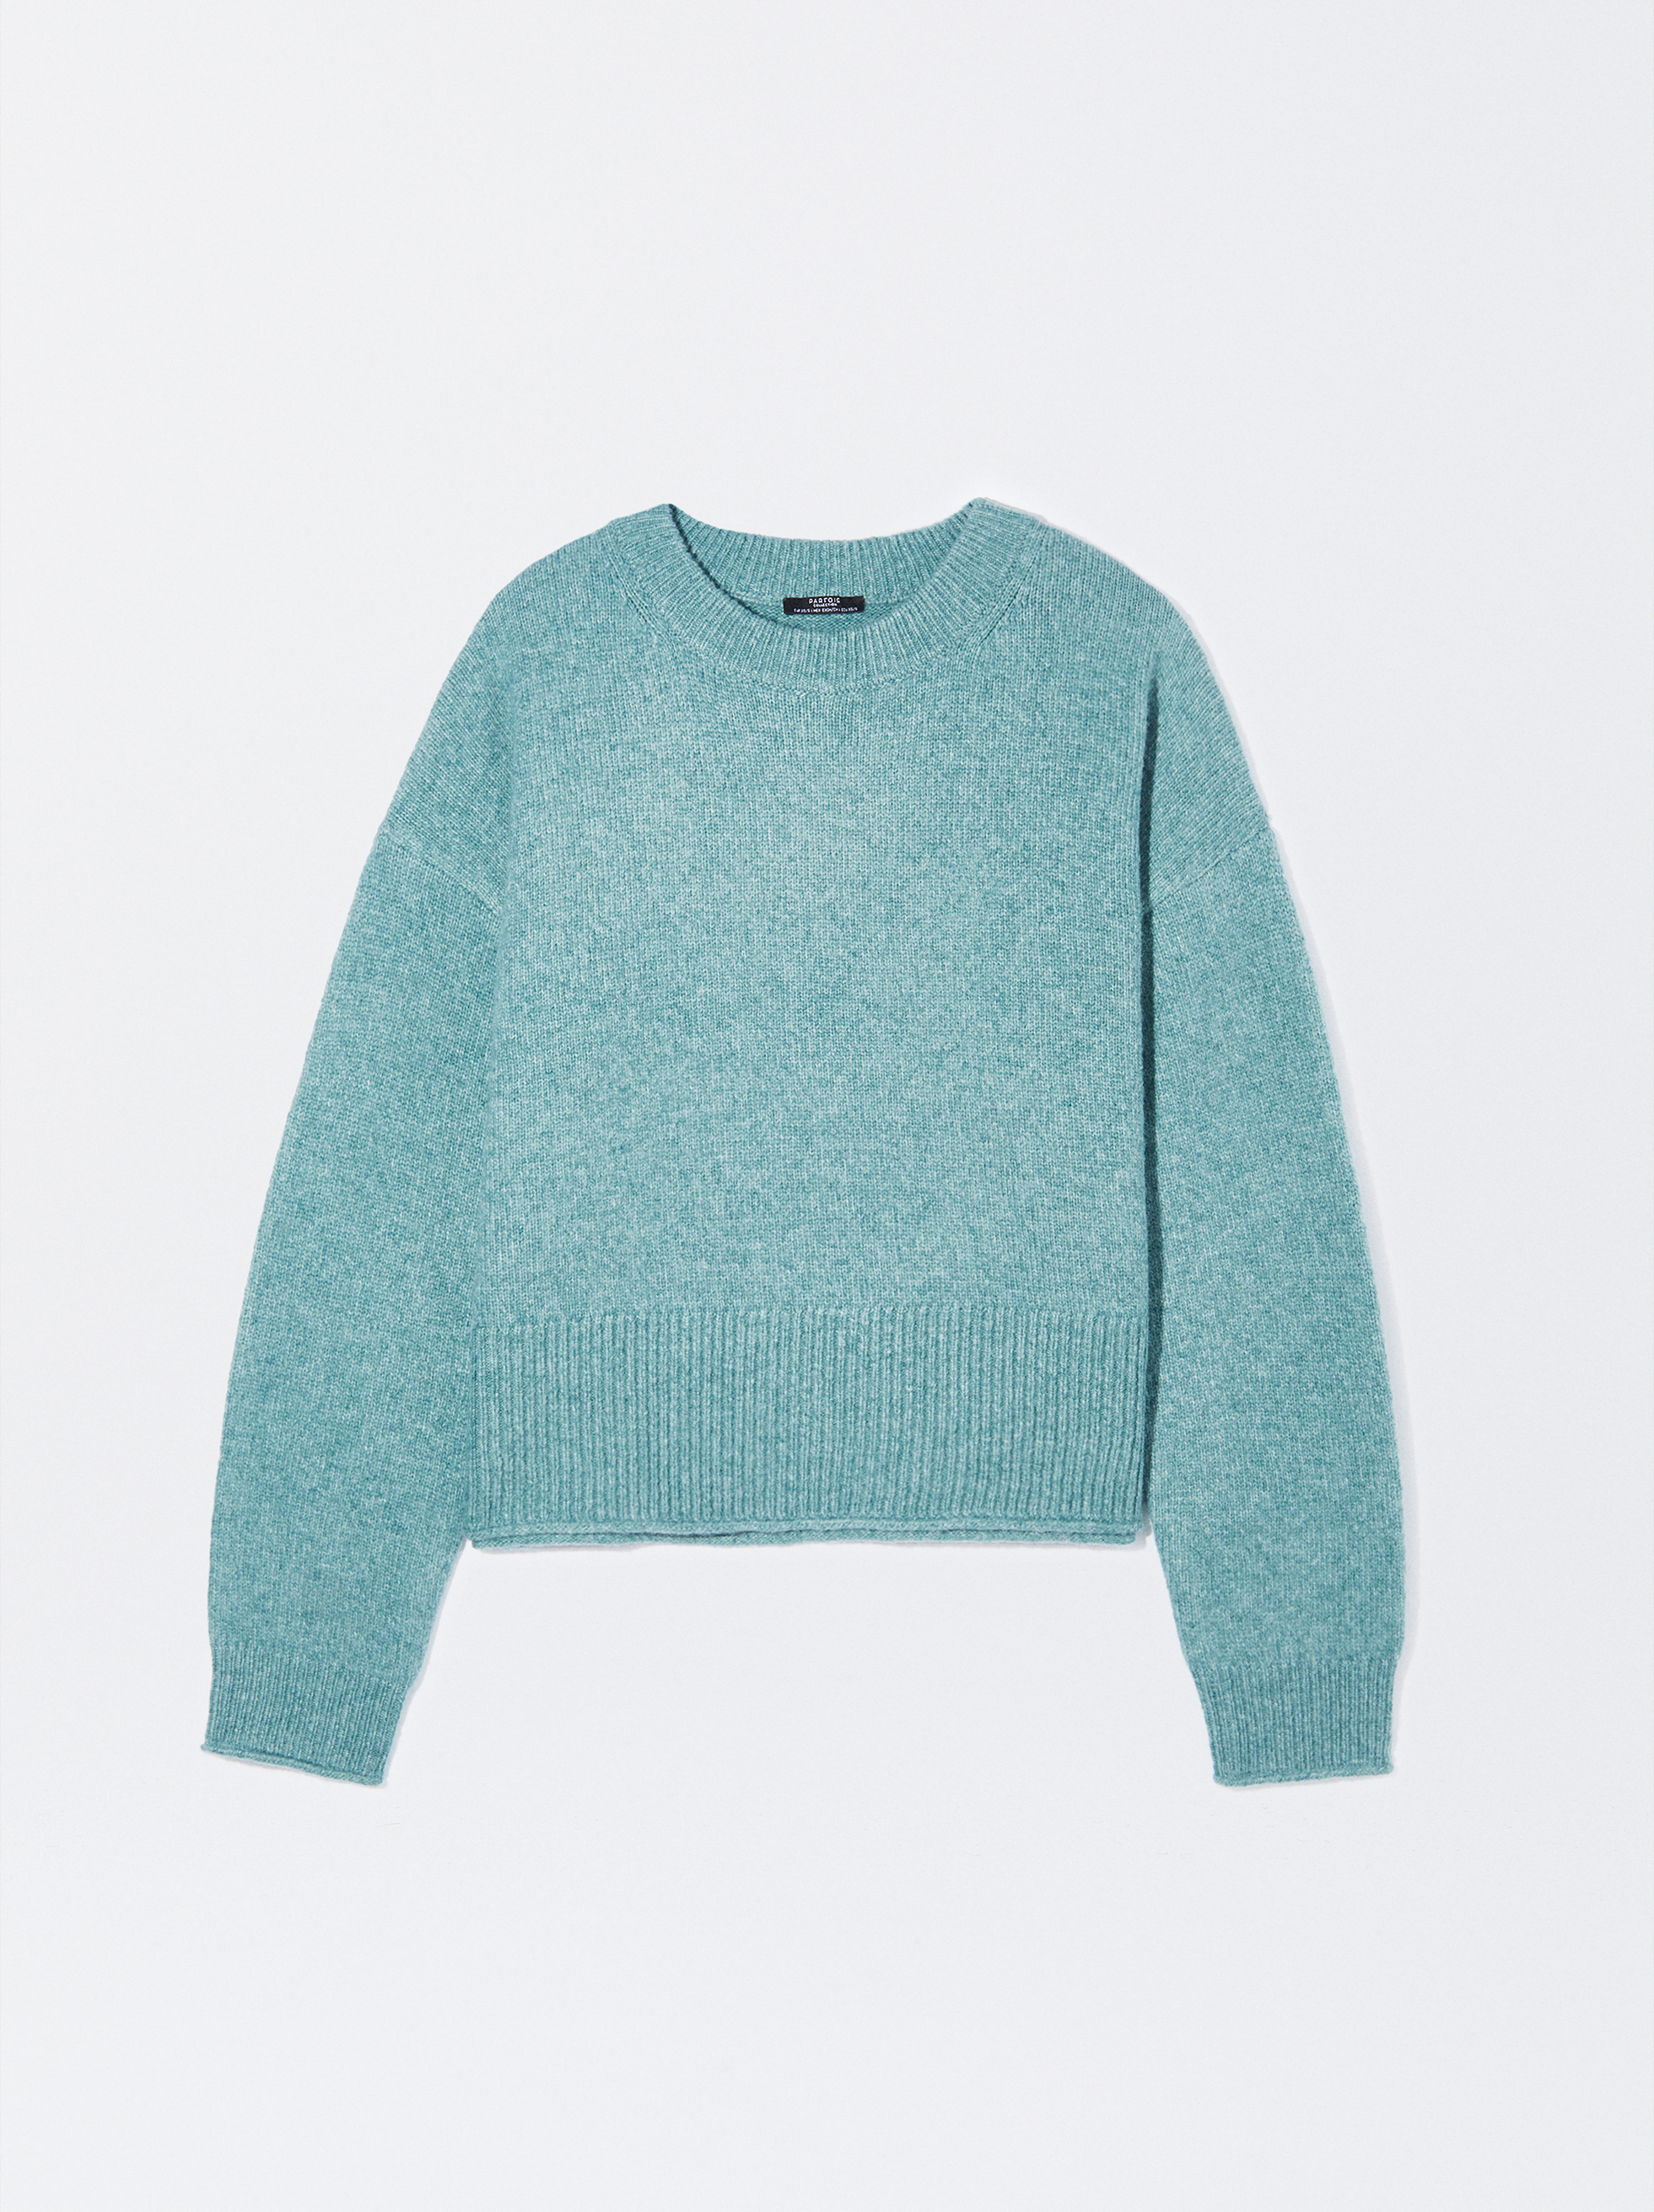 Knit Sweater image number 0.0